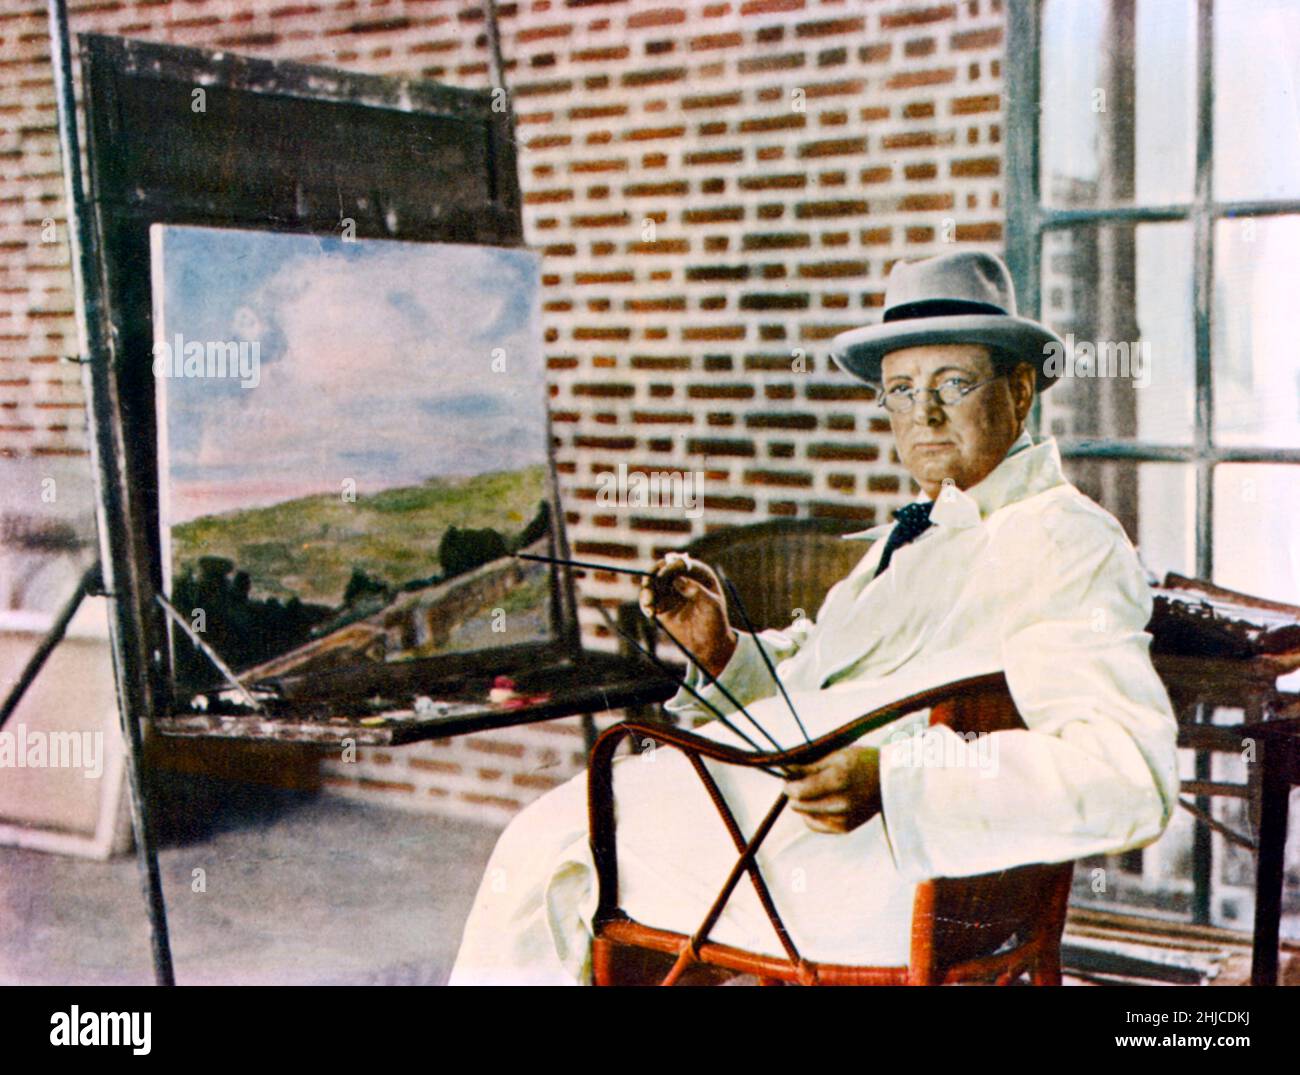 Winston Churchill. British statesman who served as Prime minister of the United Kingdom from 1940 to 1945 during the Second world war. Born on november 30 1874, dead january 24 1965. Pictured while painting in the 1940s Stock Photo